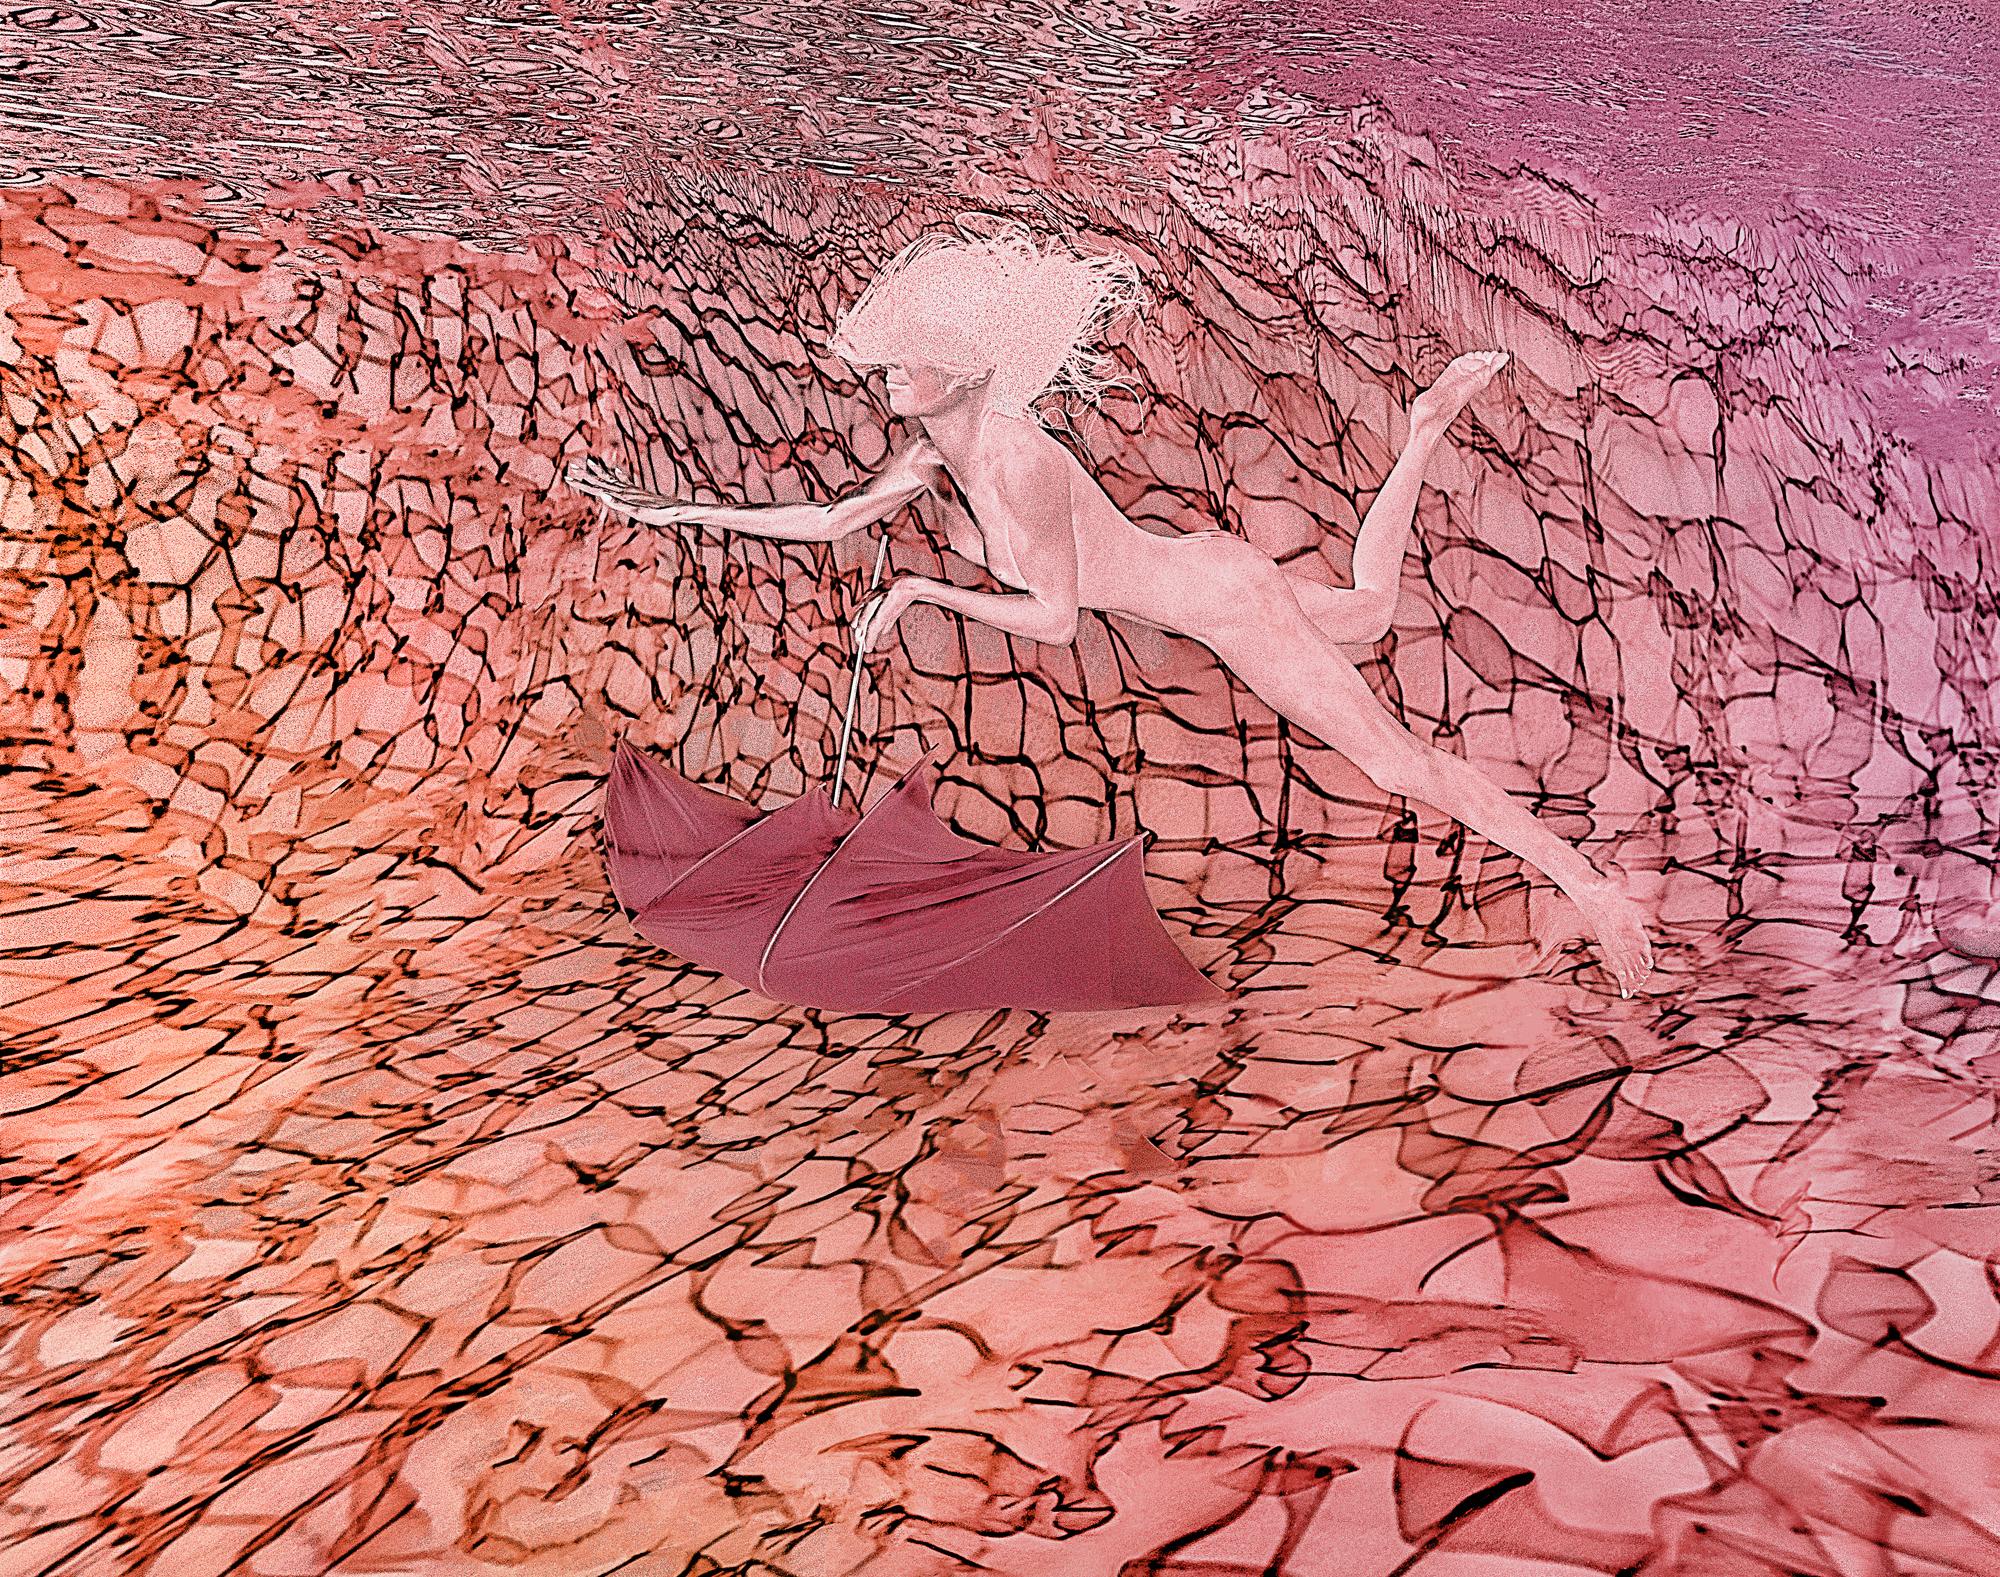 Alex Sher Abstract Photograph - Pink Flight - underwater nude photograph - print on paper 18” x 24”